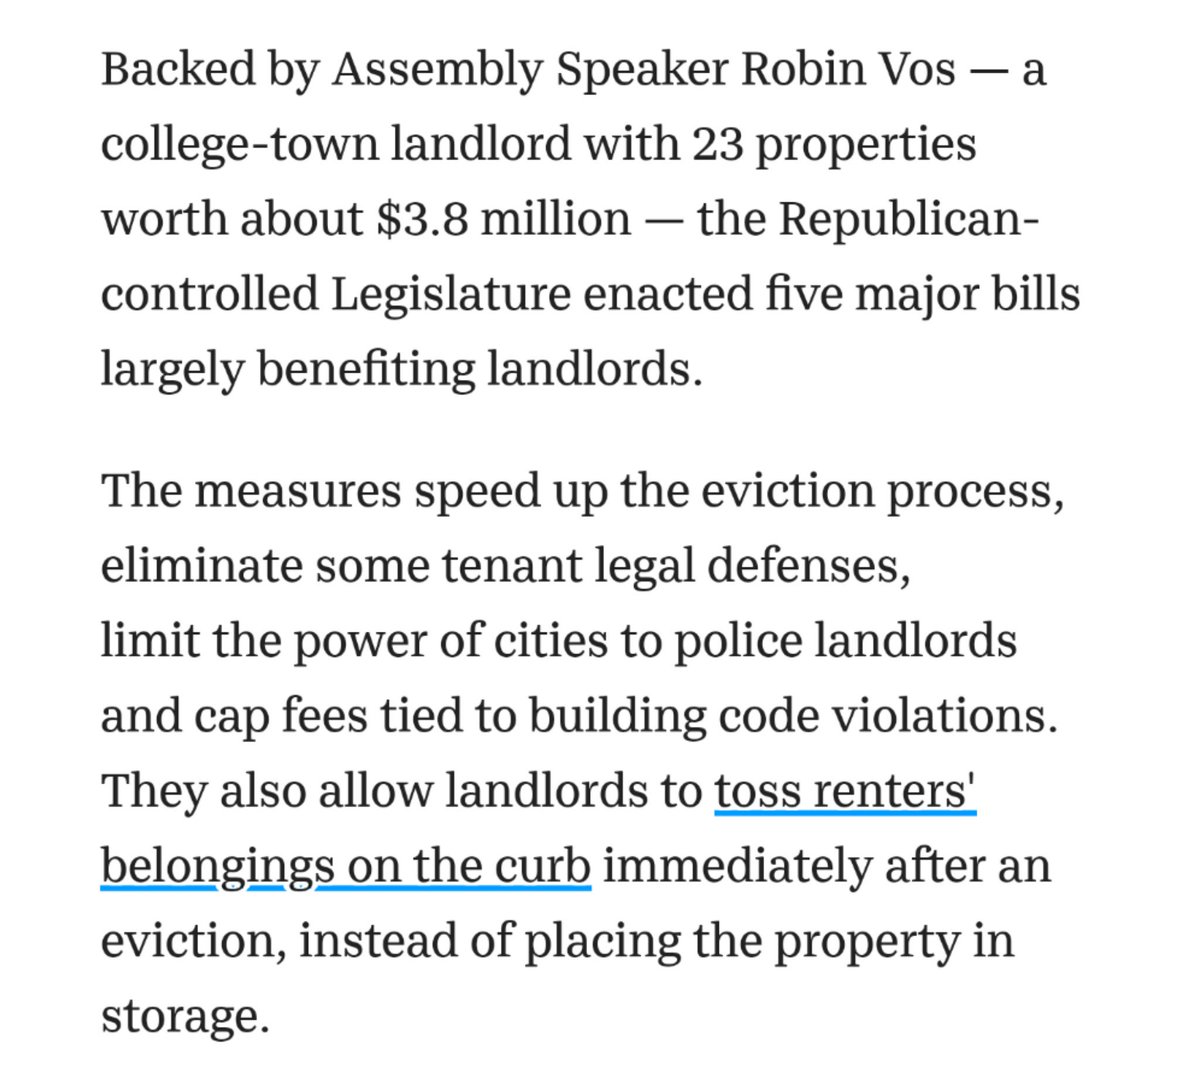 The thing to understand about Robin Vos is that he's a bad person  https://www.jsonline.com/story/news/investigations/2019/06/14/wisconsin-lawmaker-landlords-change-rental-laws-not-favor-tenants-renters-rights/1210327001/